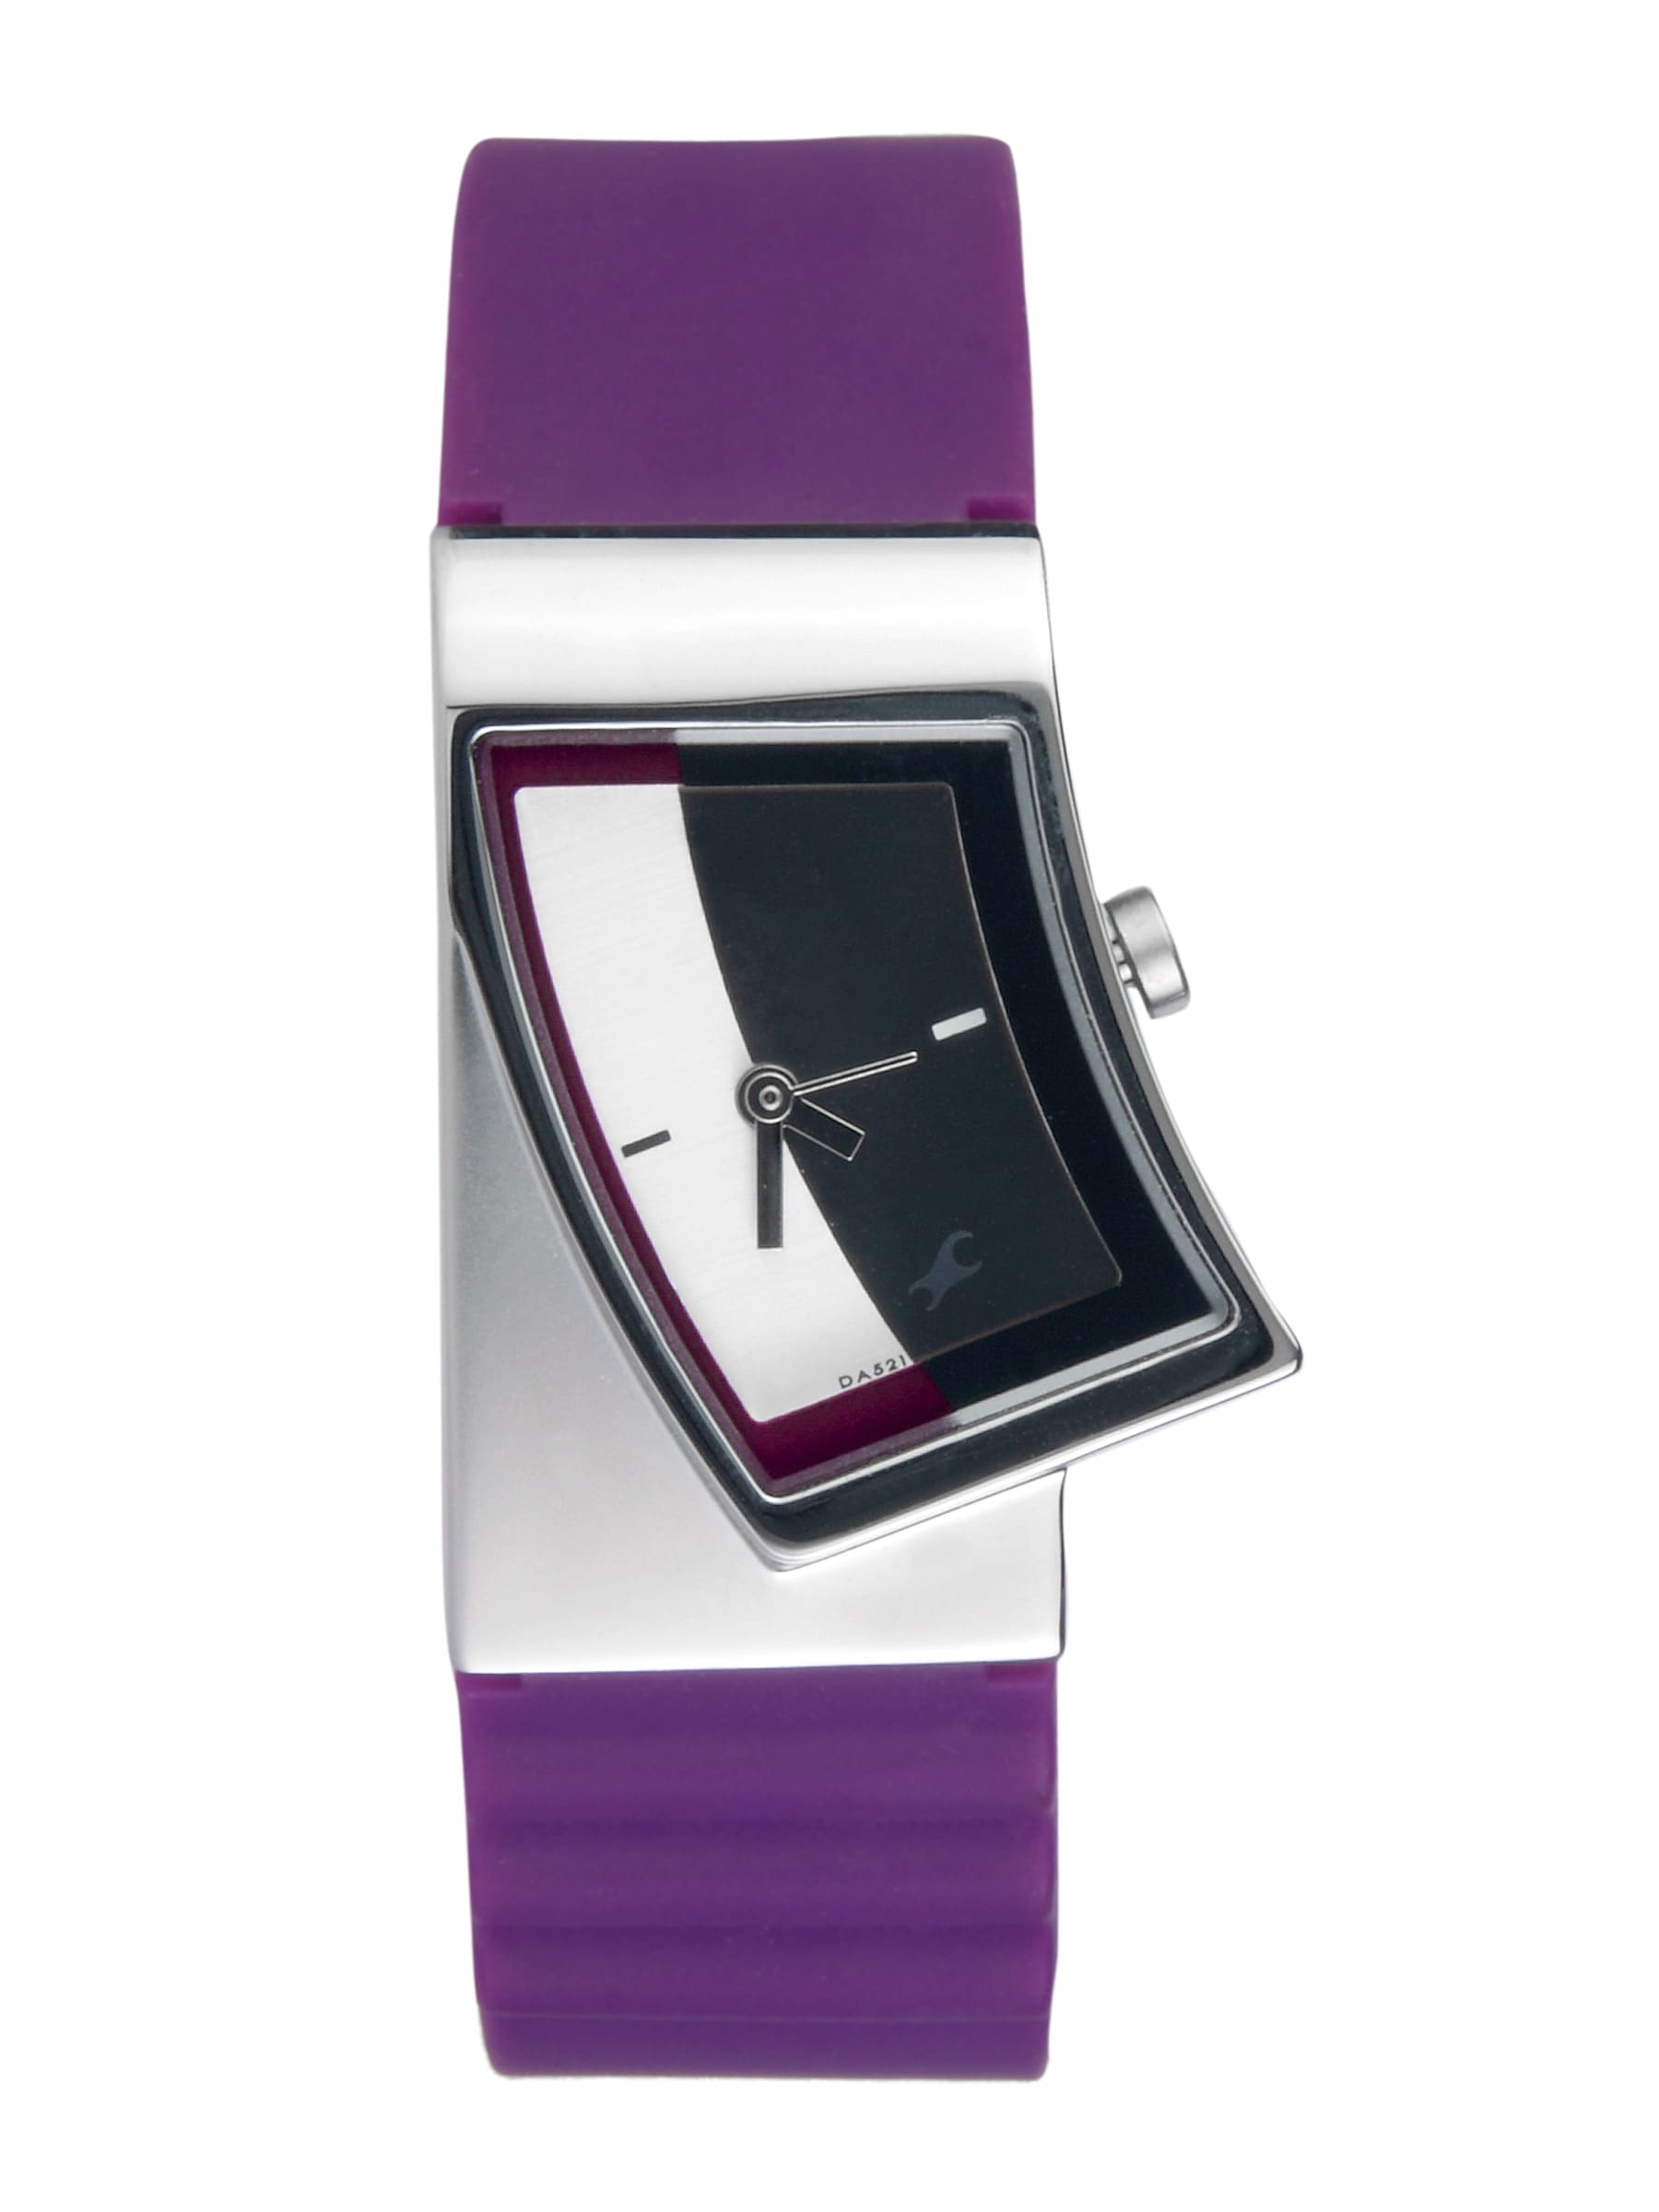 Fastrack Women Silver Casual Watch